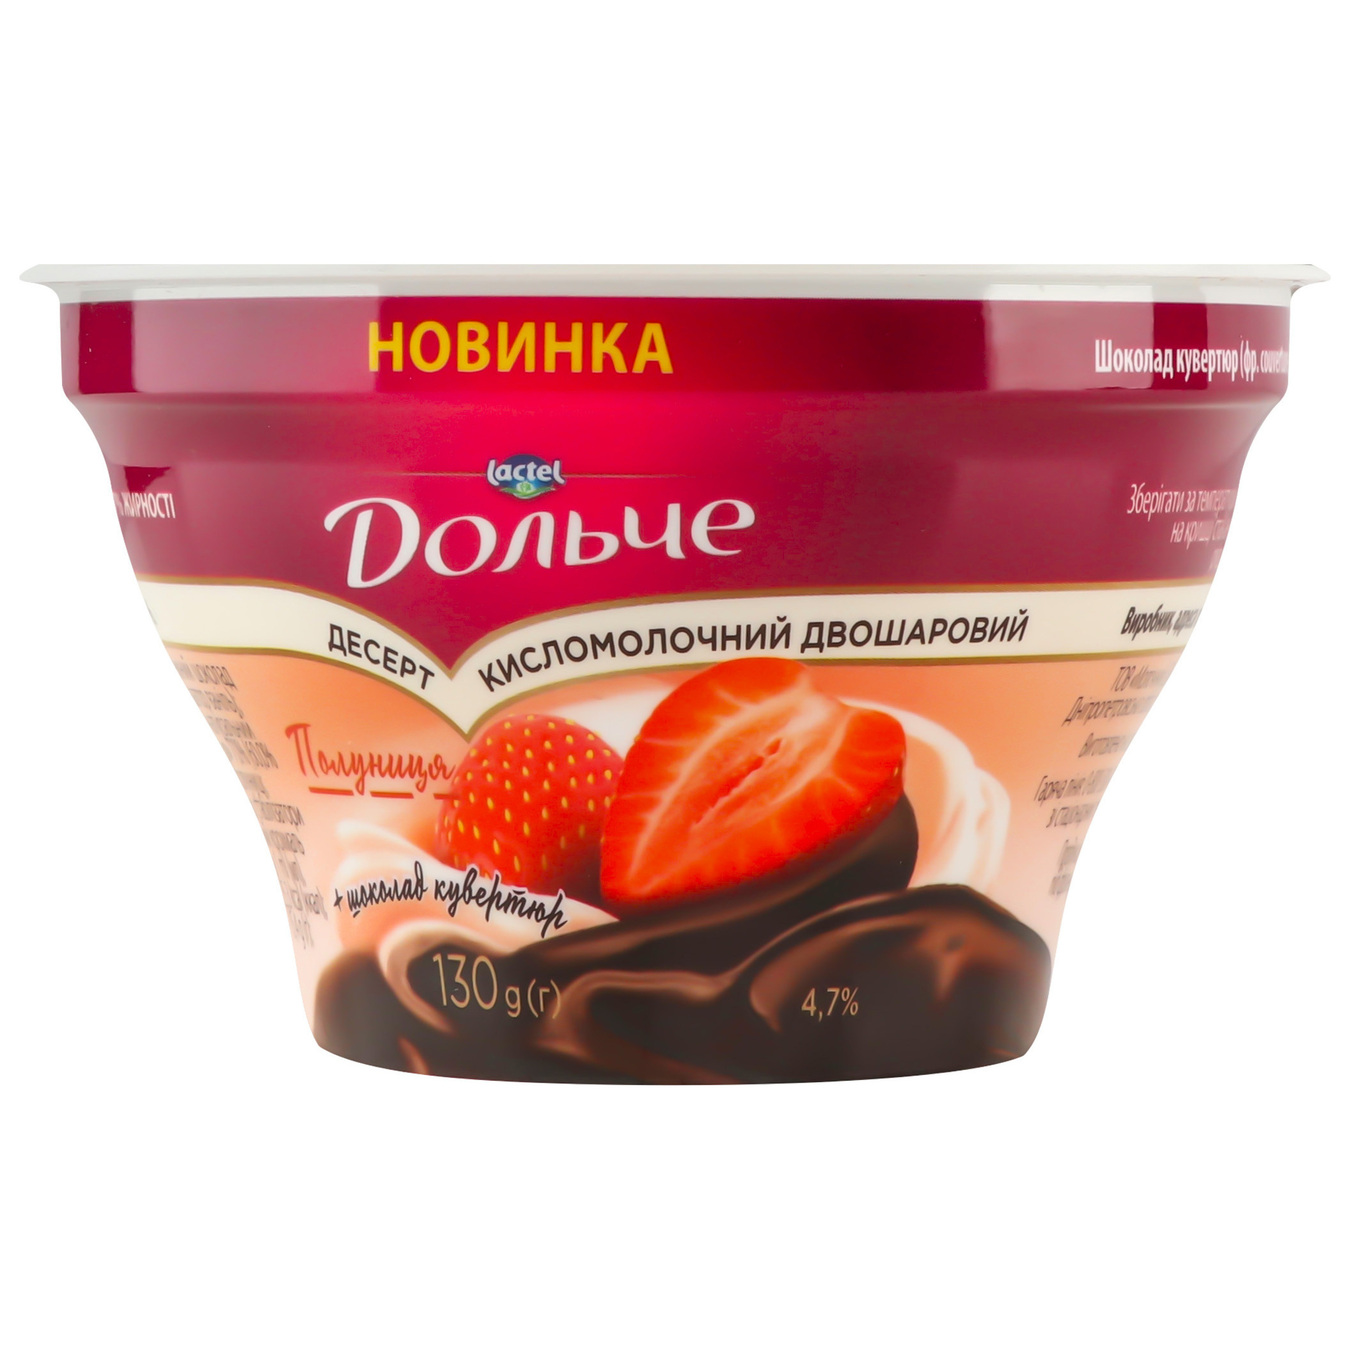 Dolce dessert with chocolate couverture and strawberry fillings cup 4.7% 130g